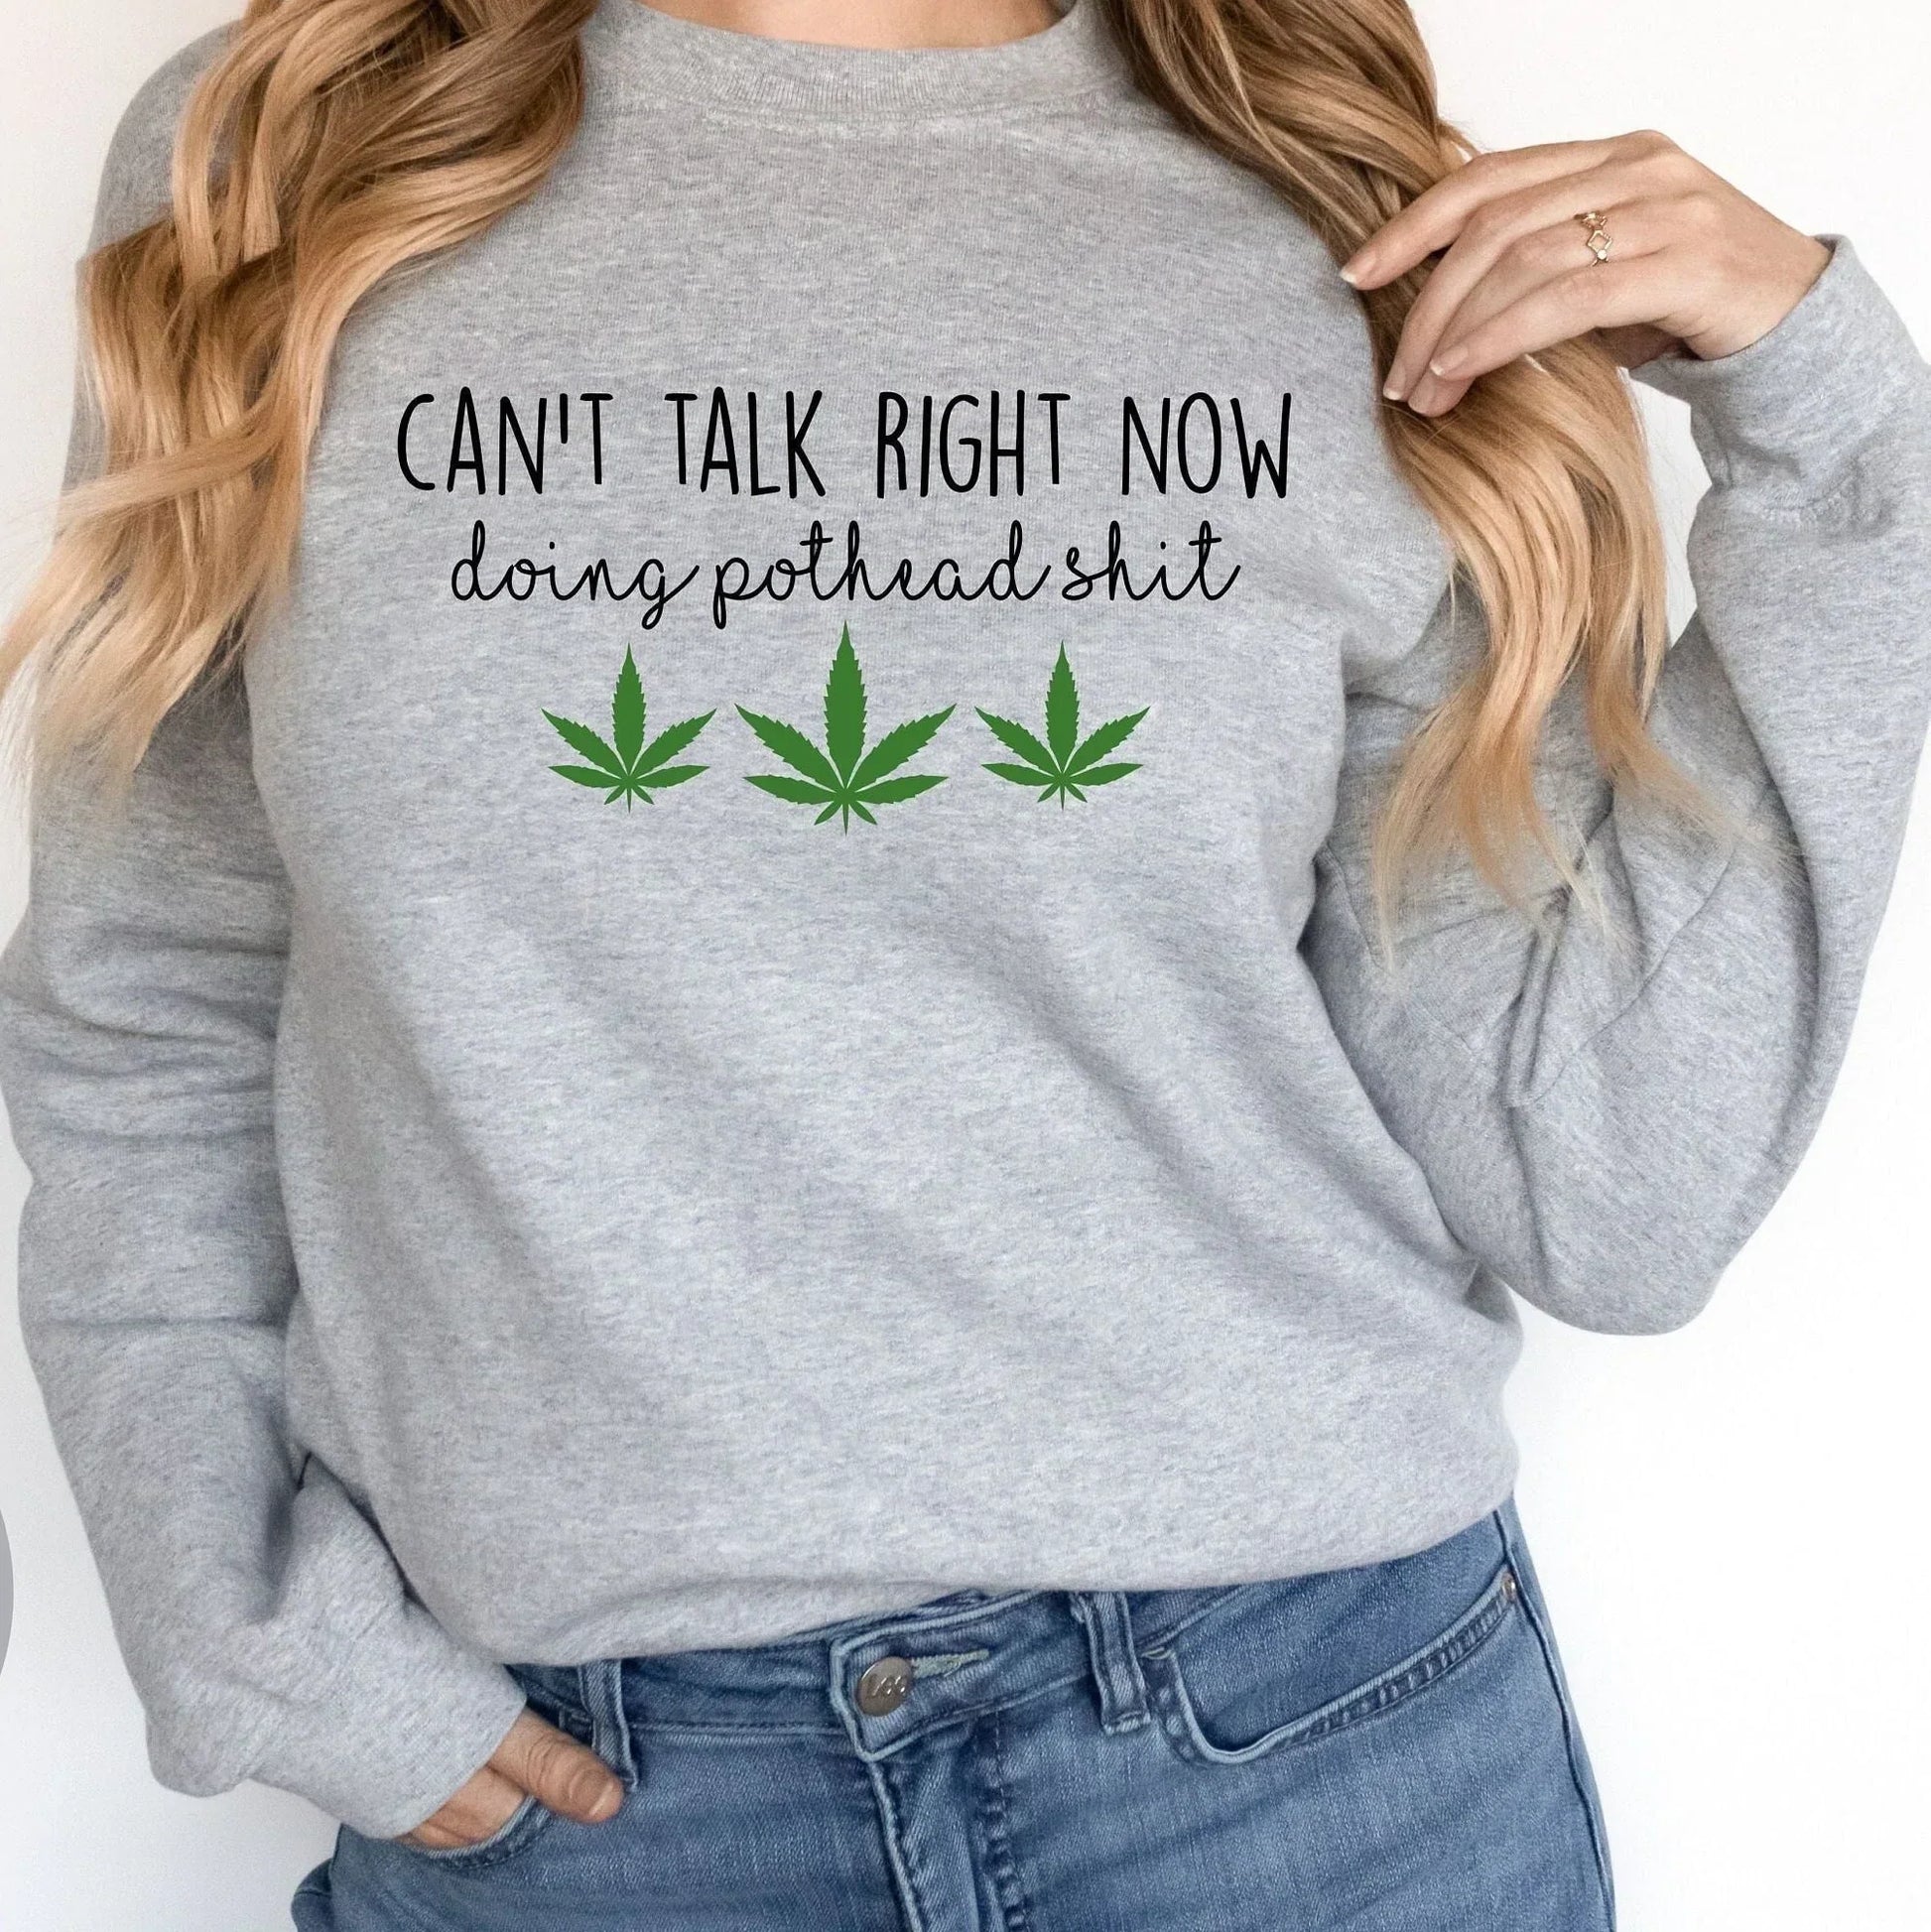 Hippie Clothes, Stoner Gifts, Pothead Sh* Weed Shirt, Stoner Gift, Stoner Girl, Stoner Gift for Him, Stoner Gift for Her, Marijuana T shirts